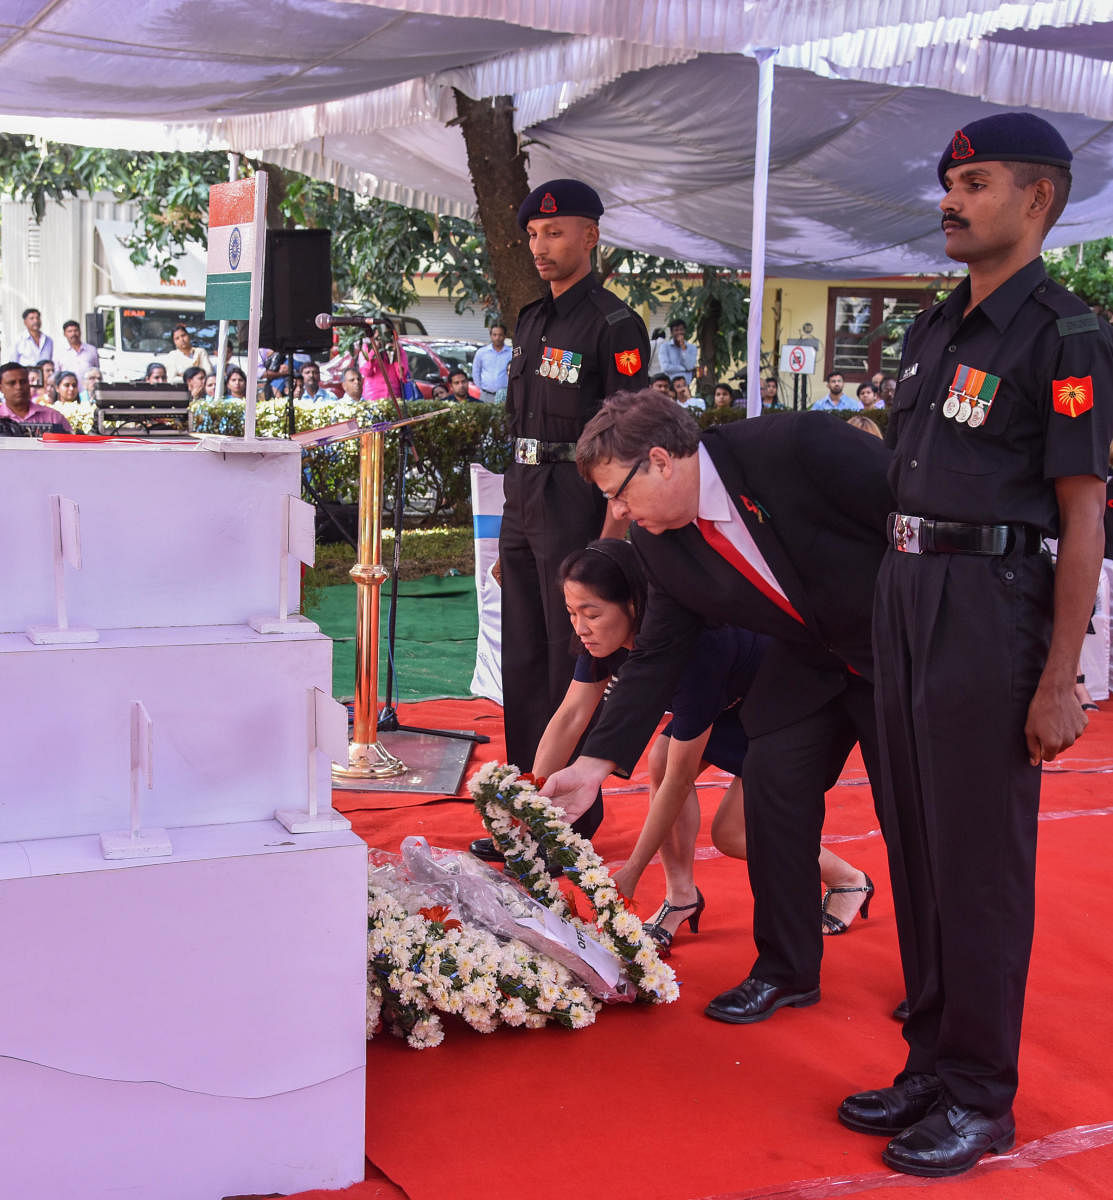 Dominic McAllister, British Deputy High Commissioner, lays wreath to the cenotaph at the Remembrance Day programme organised at St Mark's Cathedral on Sunday. DH Photo/S K Dinesh